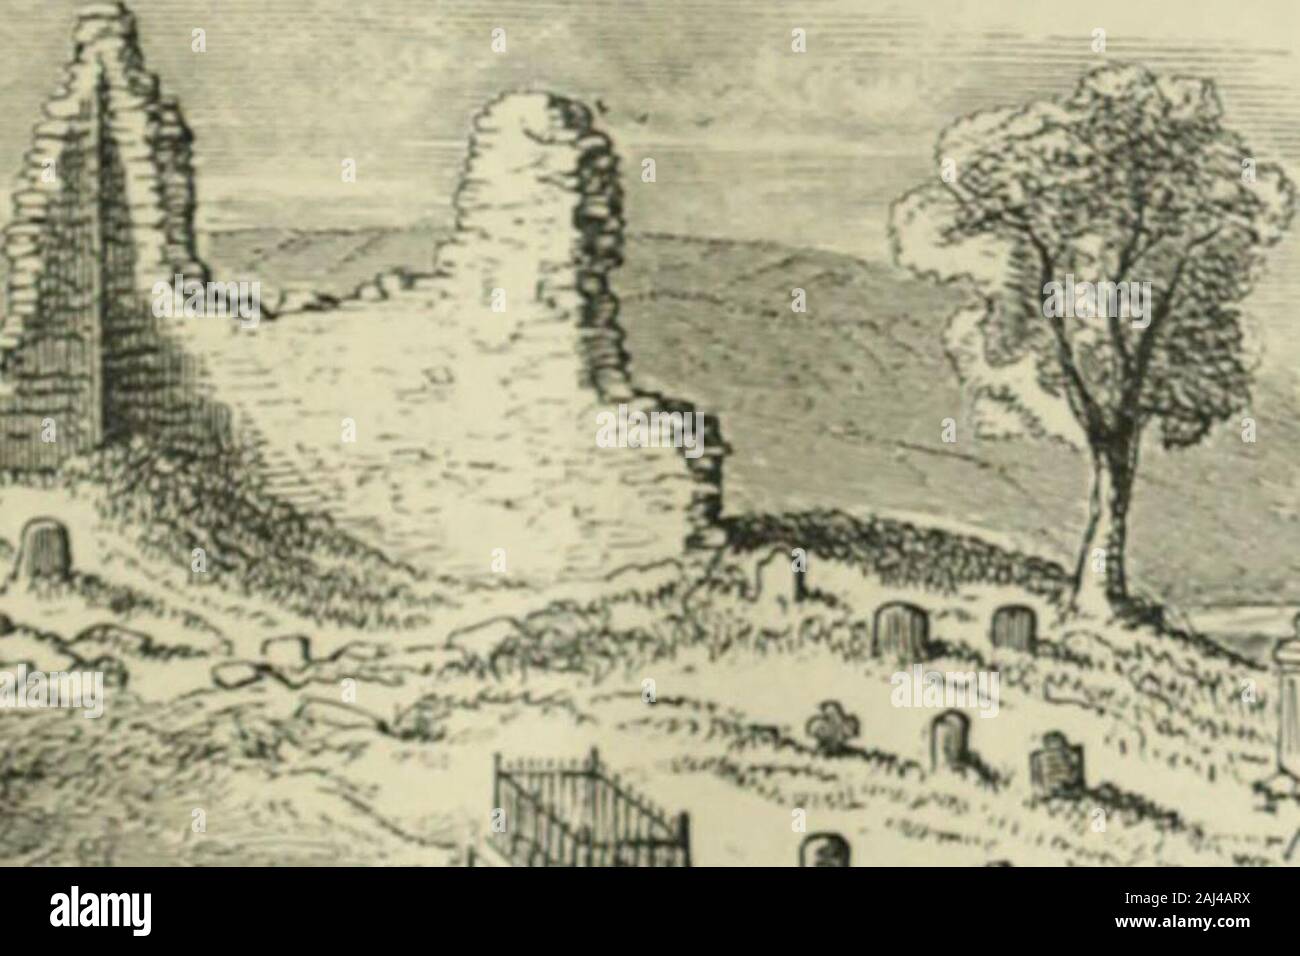 Lives of the Irish saints : with special festivals, and the commemorations of holy persons, compiled from calendars, martyrologies and various sources, relating to the ancient Church history of Ireland . 4^«^*.r-. Ruins of Agivy Church, Co. Londonderry. Those niins belonging to the old church at Agivy measure 74 feet inlength by 28 in width. About the year 1830, there was a square towerincluded in the length : it was 40 feet in height. People in the neighbour- ?Sec Colgans Acta Sanctorum Hiber-nia-, xxxi. Januarii. Vita S. Maidoci. Ap-pendix, cap. iv., p 223. See l&gt;r. Kccves edition of Arch Stock Photo